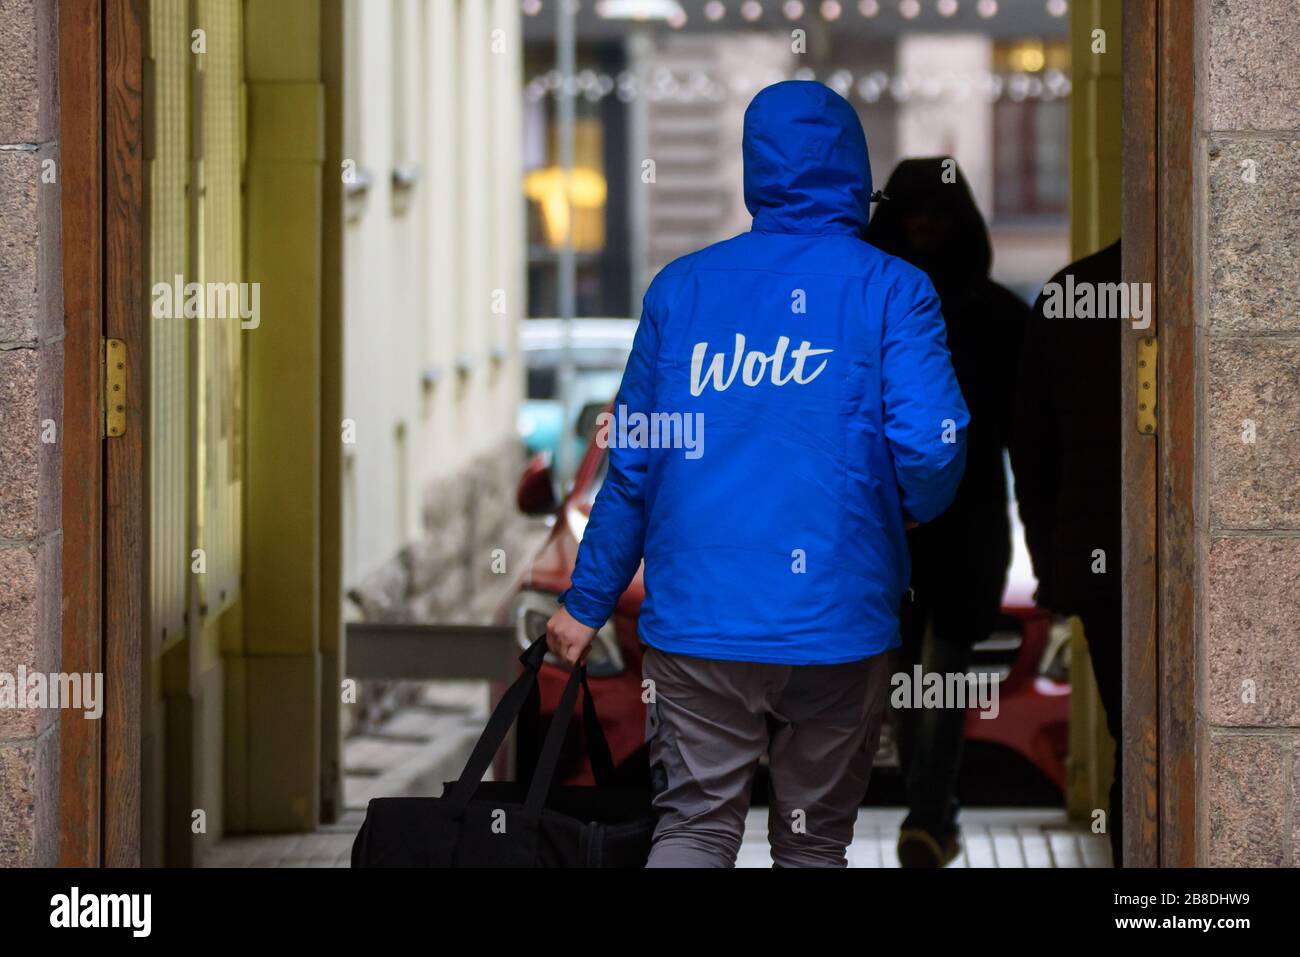 RIGA, LATVIA. 25th November 2019. Wolt company food delivery worker walks with food bag in Riga city. Wolt is Finnish technology company that is known for its food-delivery platform. Stock Photo